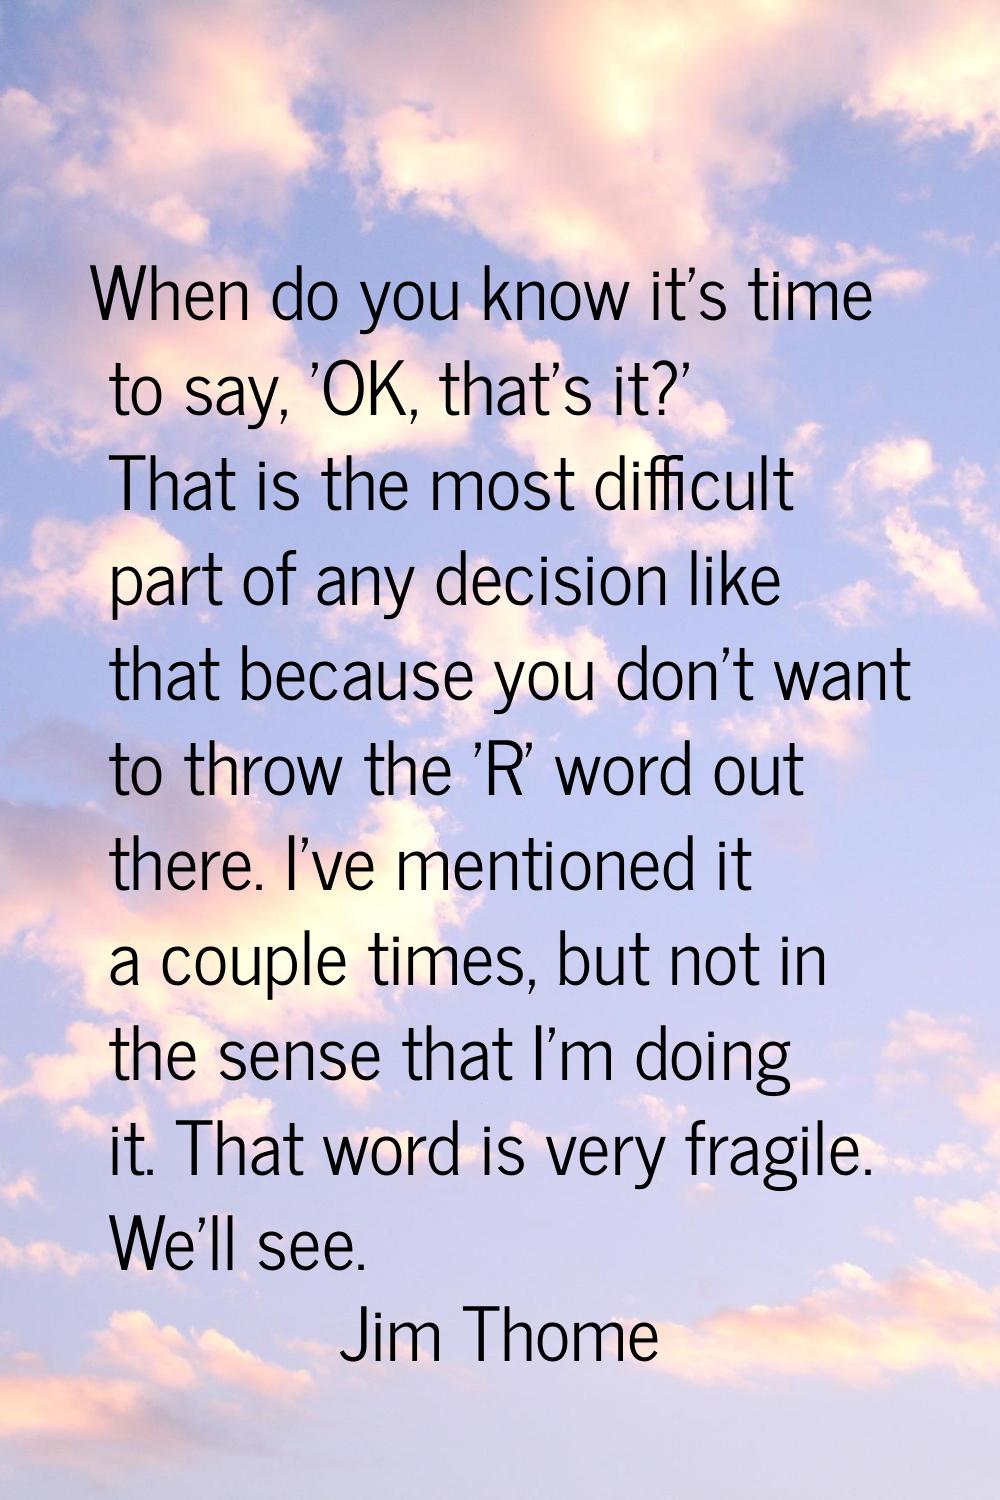 When do you know it's time to say, 'OK, that's it?' That is the most difficult part of any decision